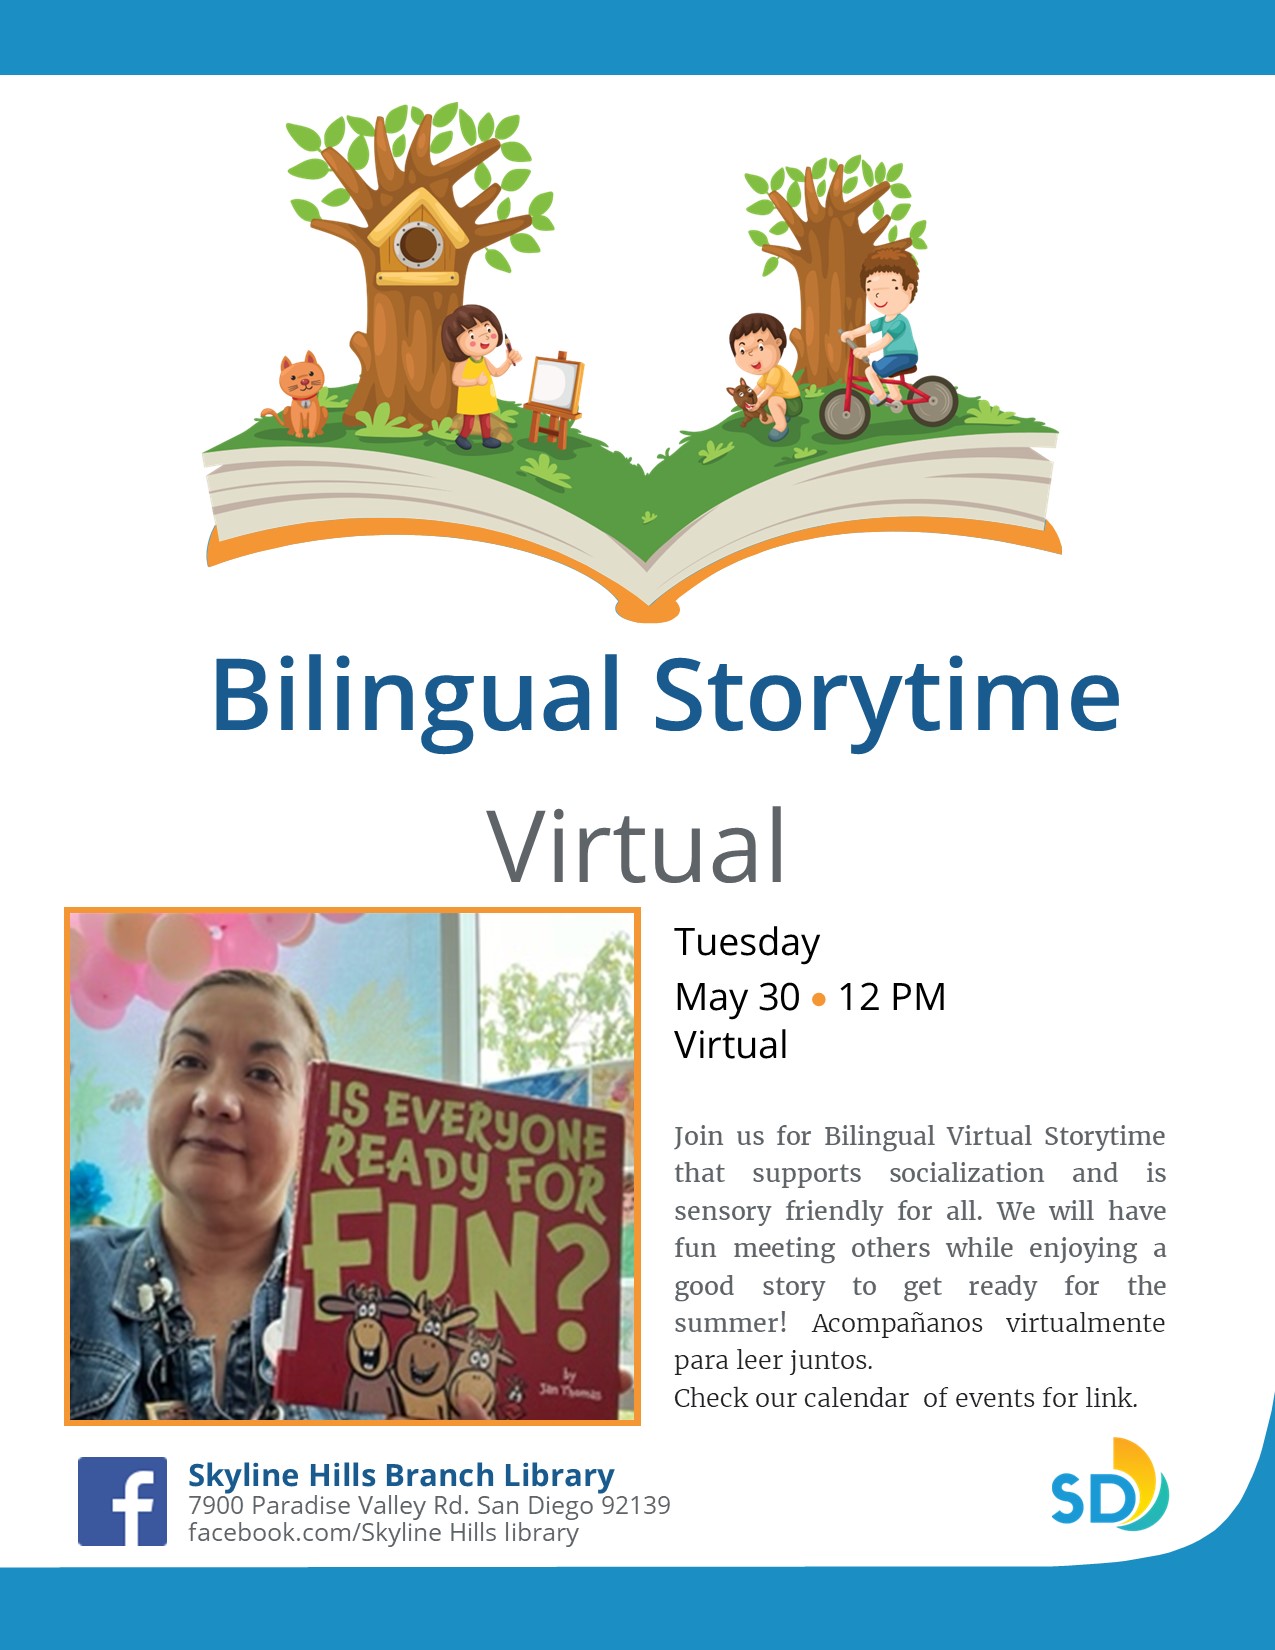 Virtual Bilingual Storytime at Skyline Hills with Mrs. Claudia